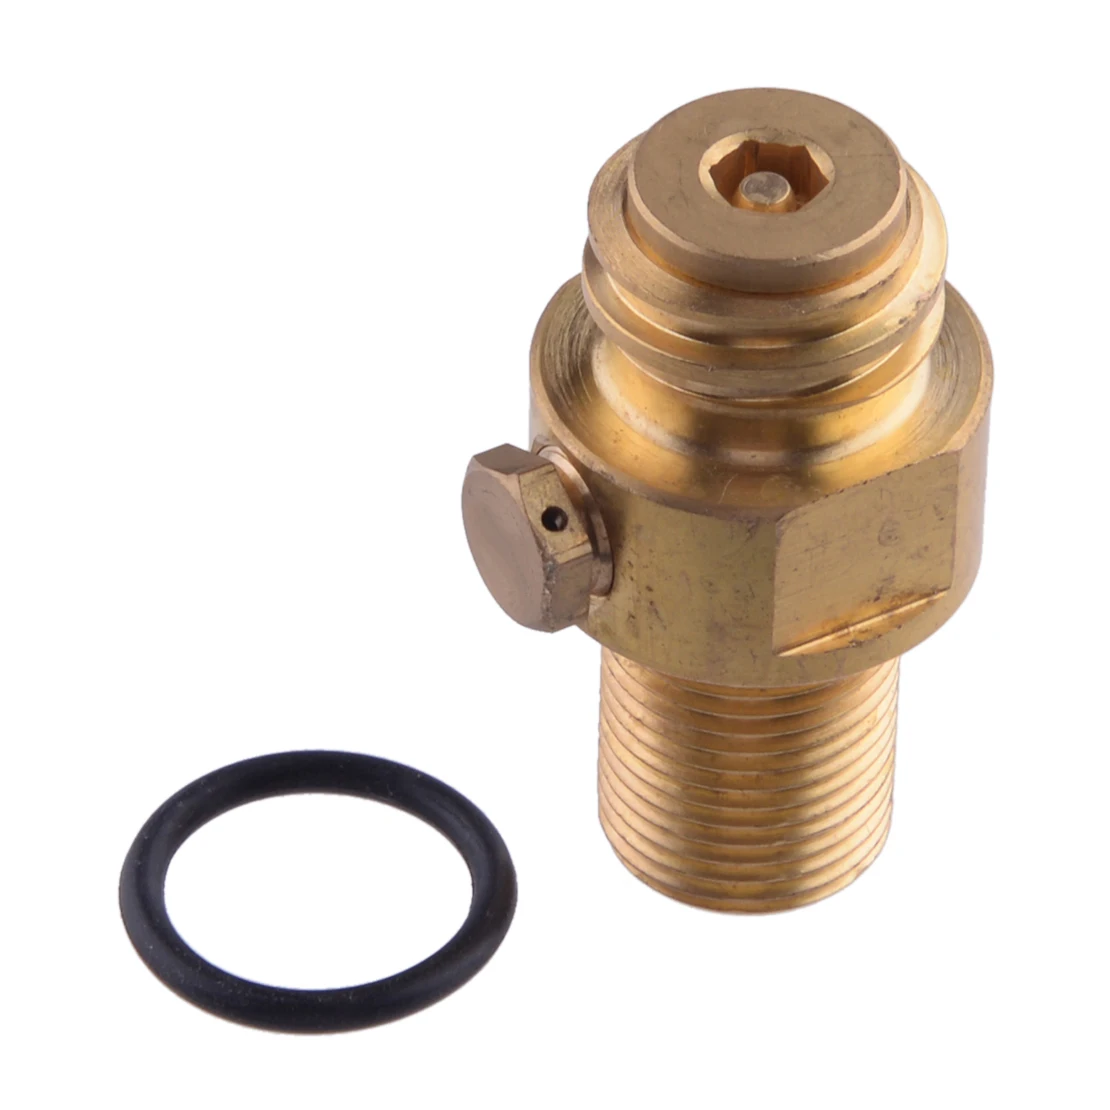 M18 Threads Brass CO2 Tank Valve Adapter For Soda Stream Pin Maker Replacement 